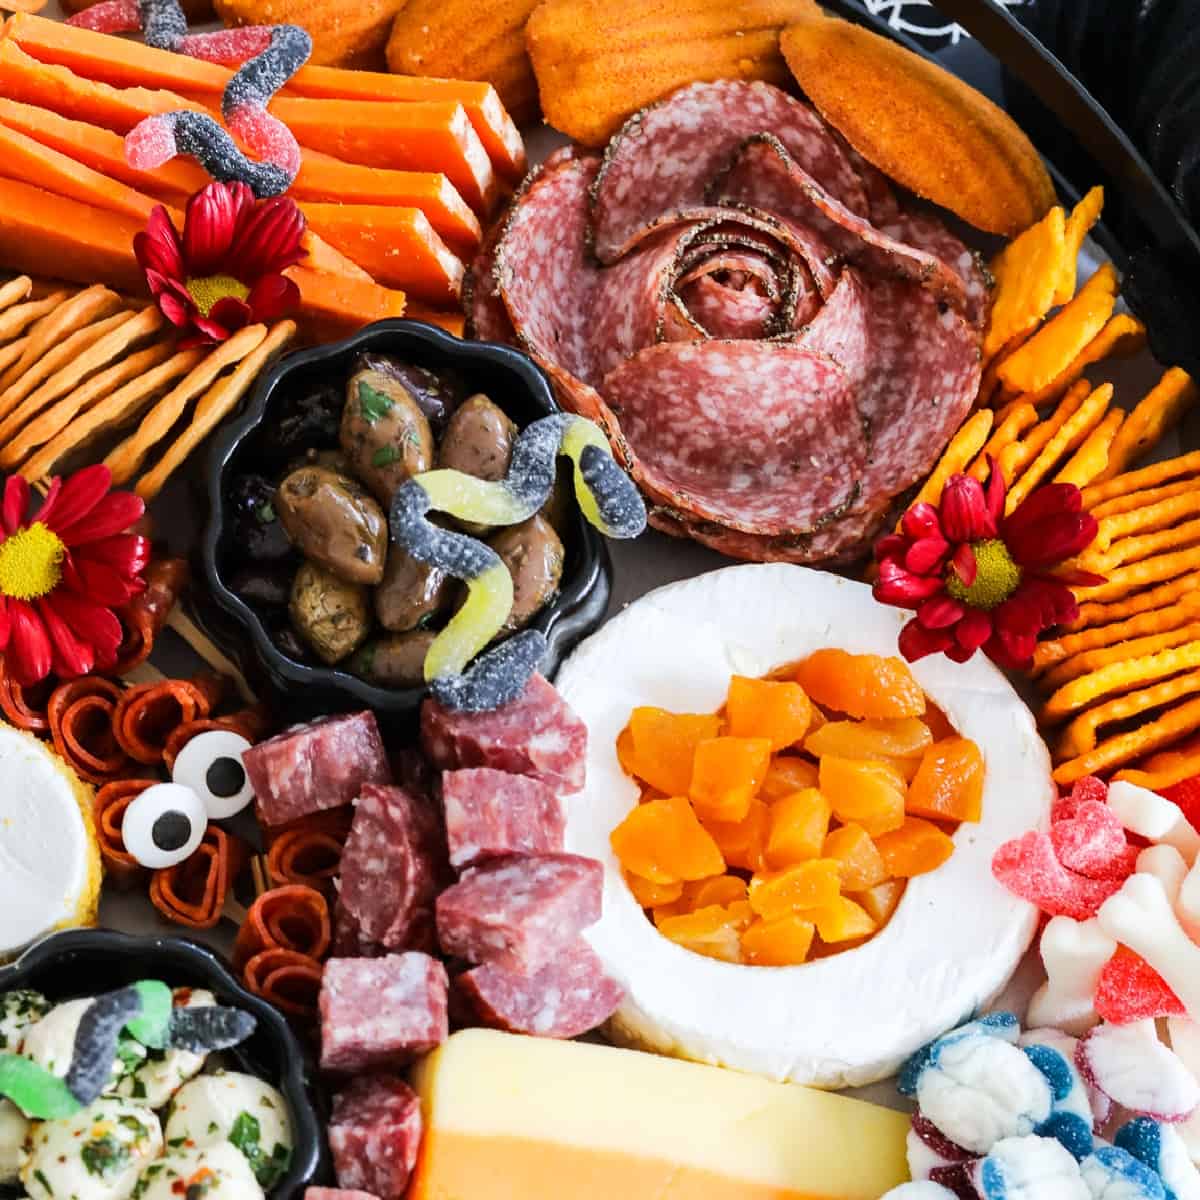 A large Halloween Charcuterie cheeseboard loaded with stacks of crackers, cut and sliced meats, nuts, and Halloween candy for a Halloween party.